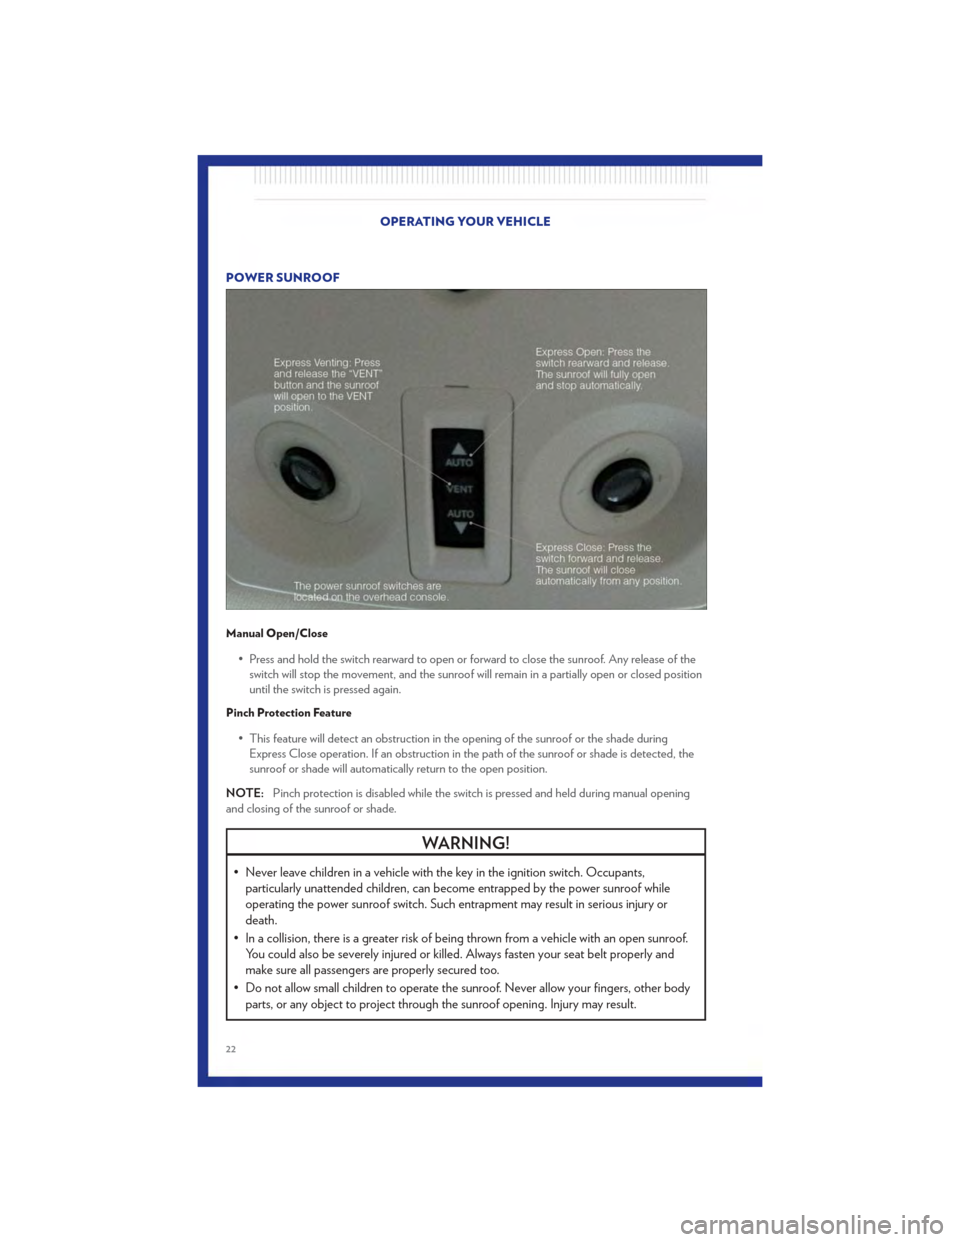 CHRYSLER 200 2011 1.G User Guide POWER SUNROOF
Manual Open/Close
• Press and hold the switch rearward to open or forward to close the sunroof. Any release of theswitch will stop the movement, and the sunroof will remain in a partia